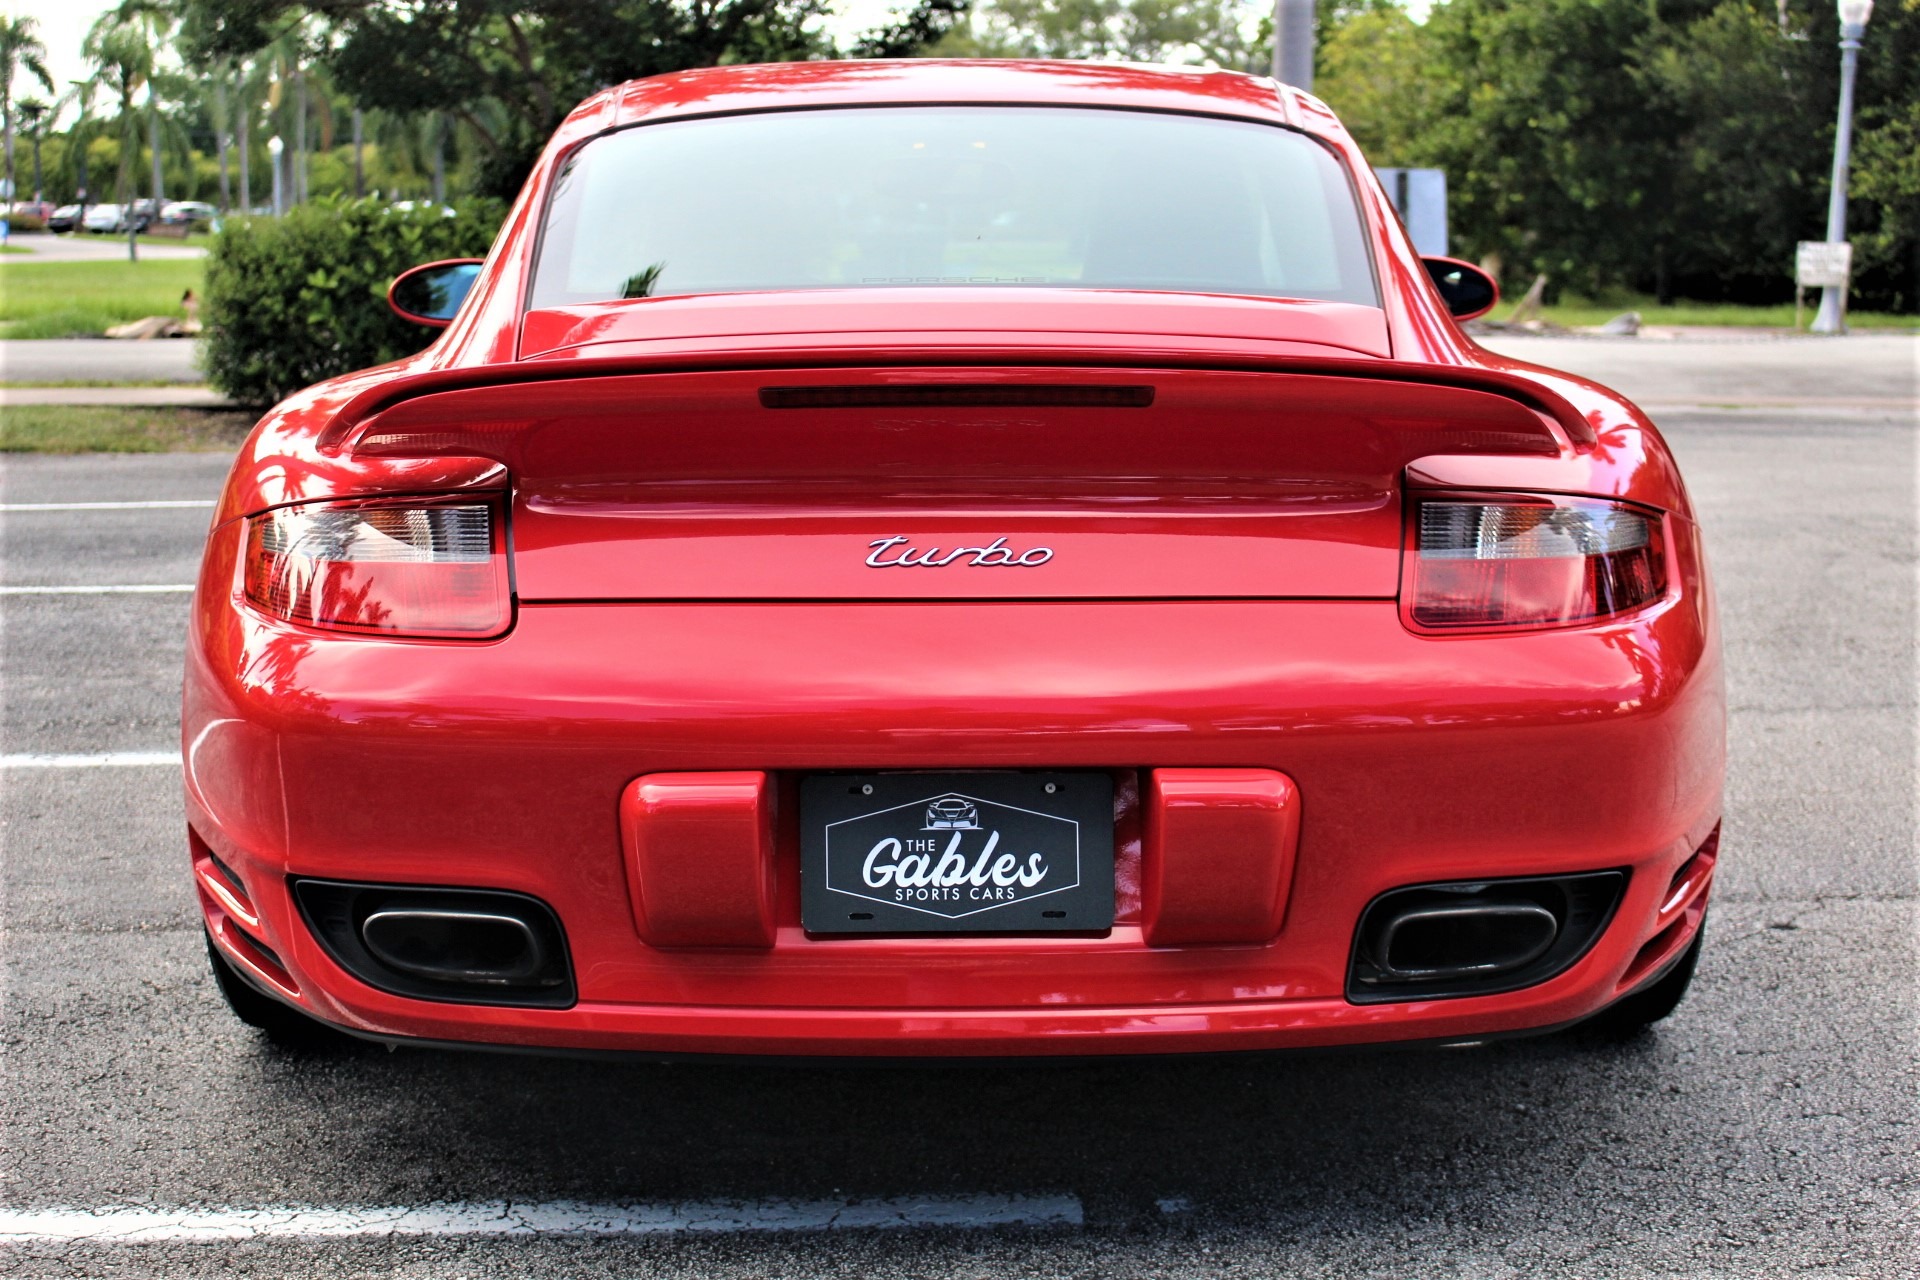 Used 2007 Porsche 911 Turbo for sale Sold at The Gables Sports Cars in Miami FL 33146 3